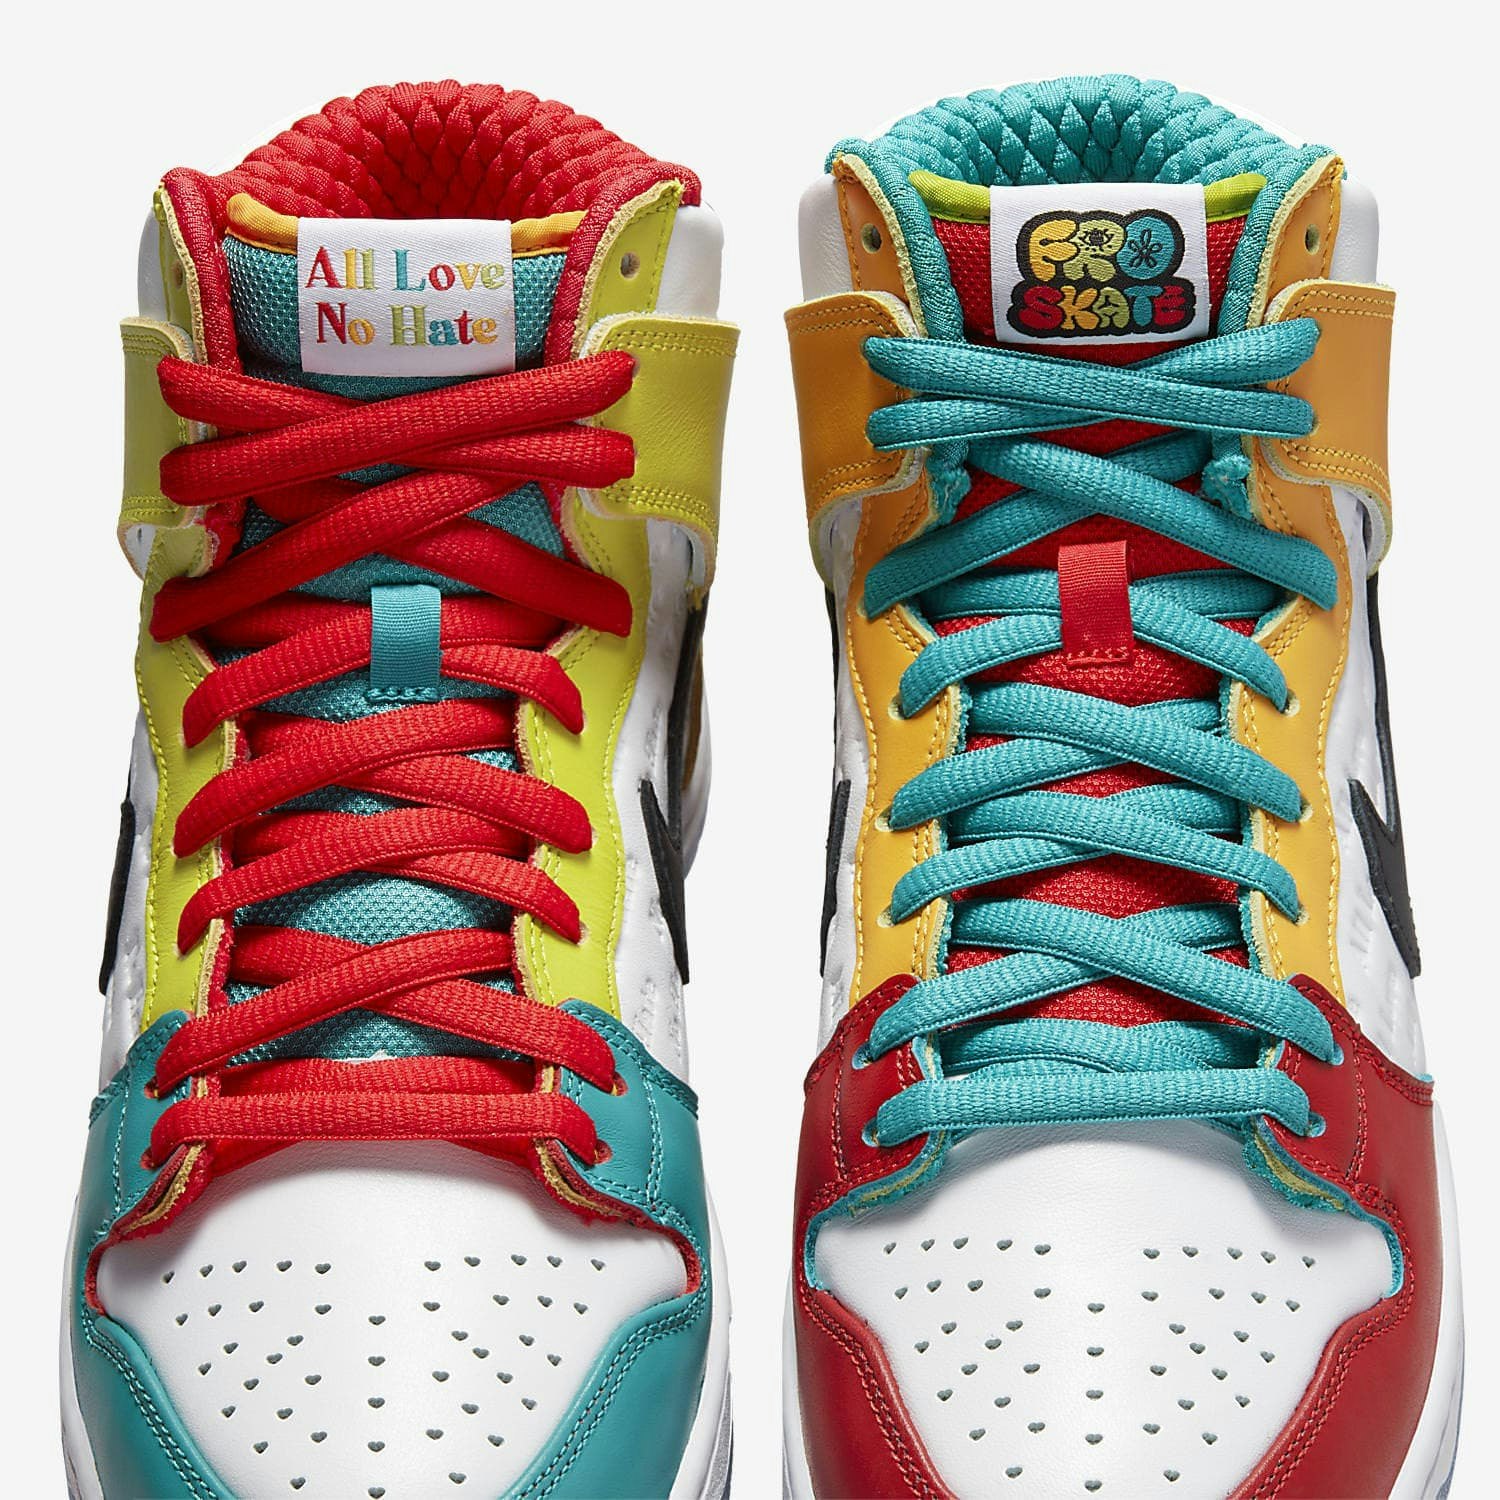 FroSkate x Nike SB Dunk High "All Love No Hate"